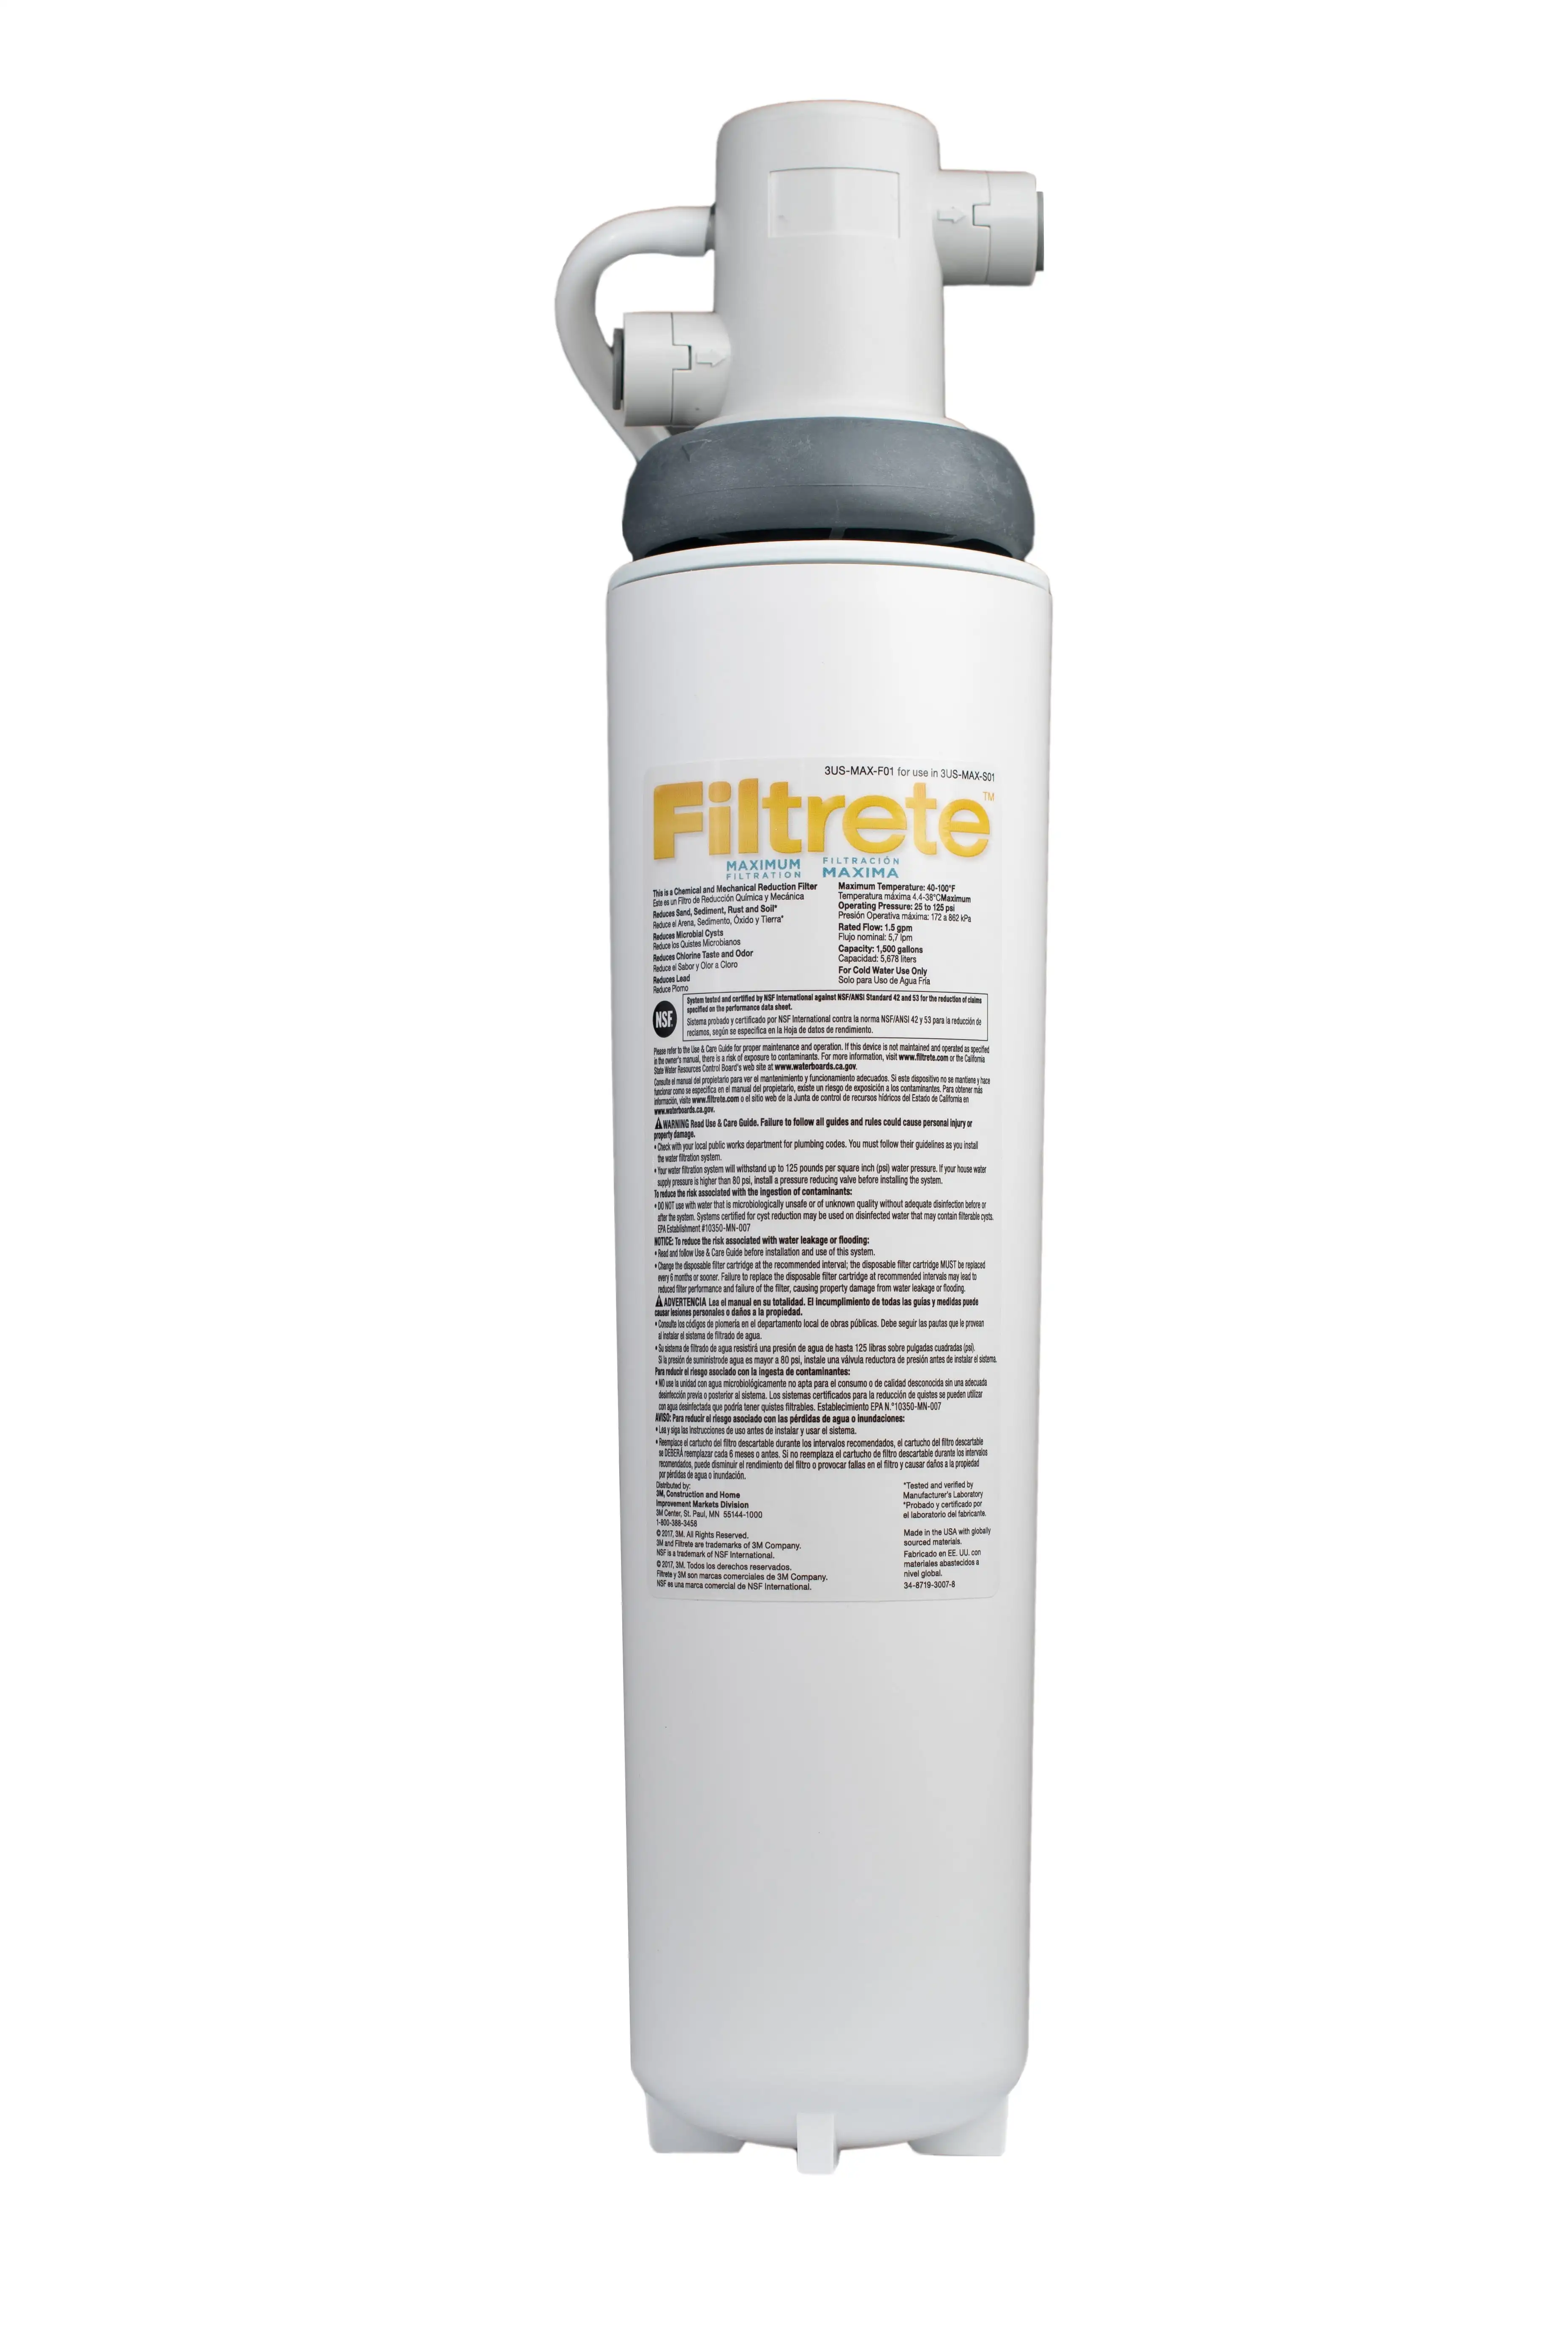 Filtrete 3US-MAX-F01 Maximum Under Sink Quick Change Water Filtration Replacement Filter for 3US-MAX-S01 Systems